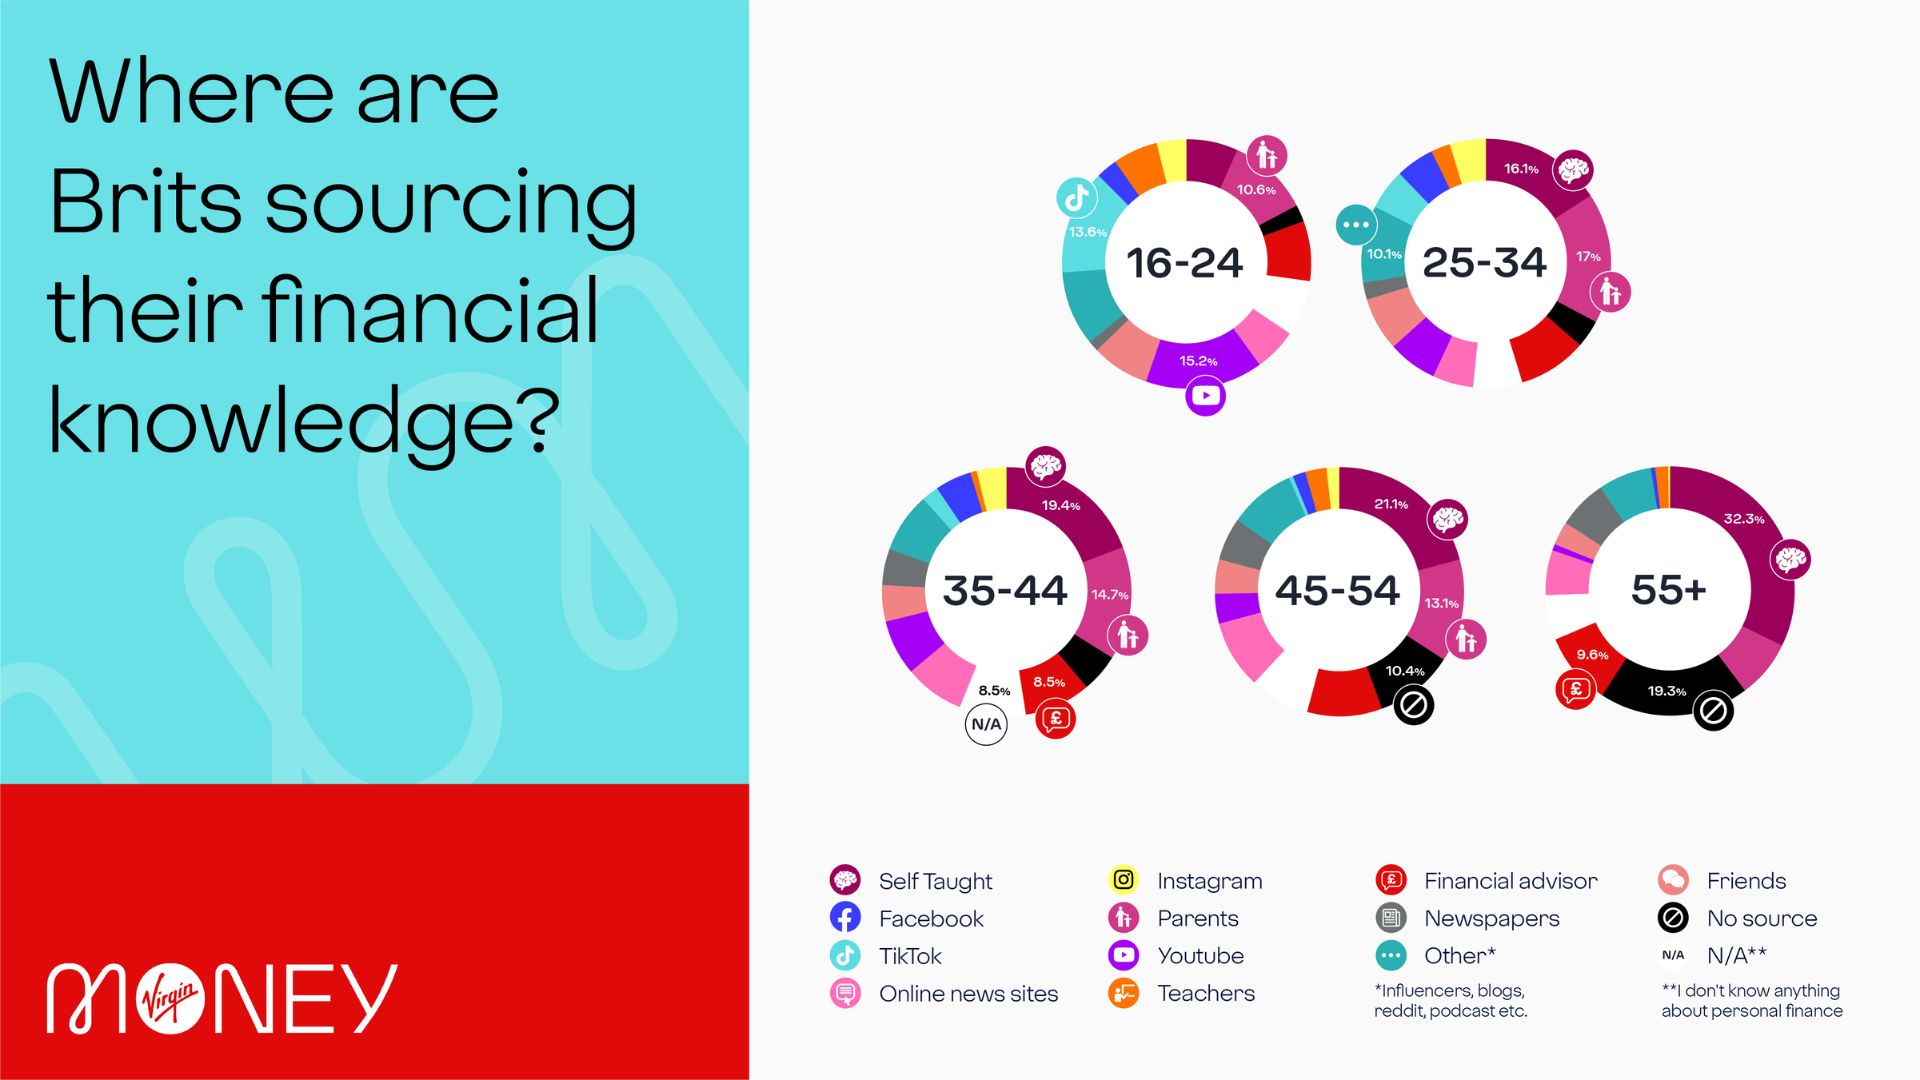 infographic showing where Brits are sourcing their financial knowledge